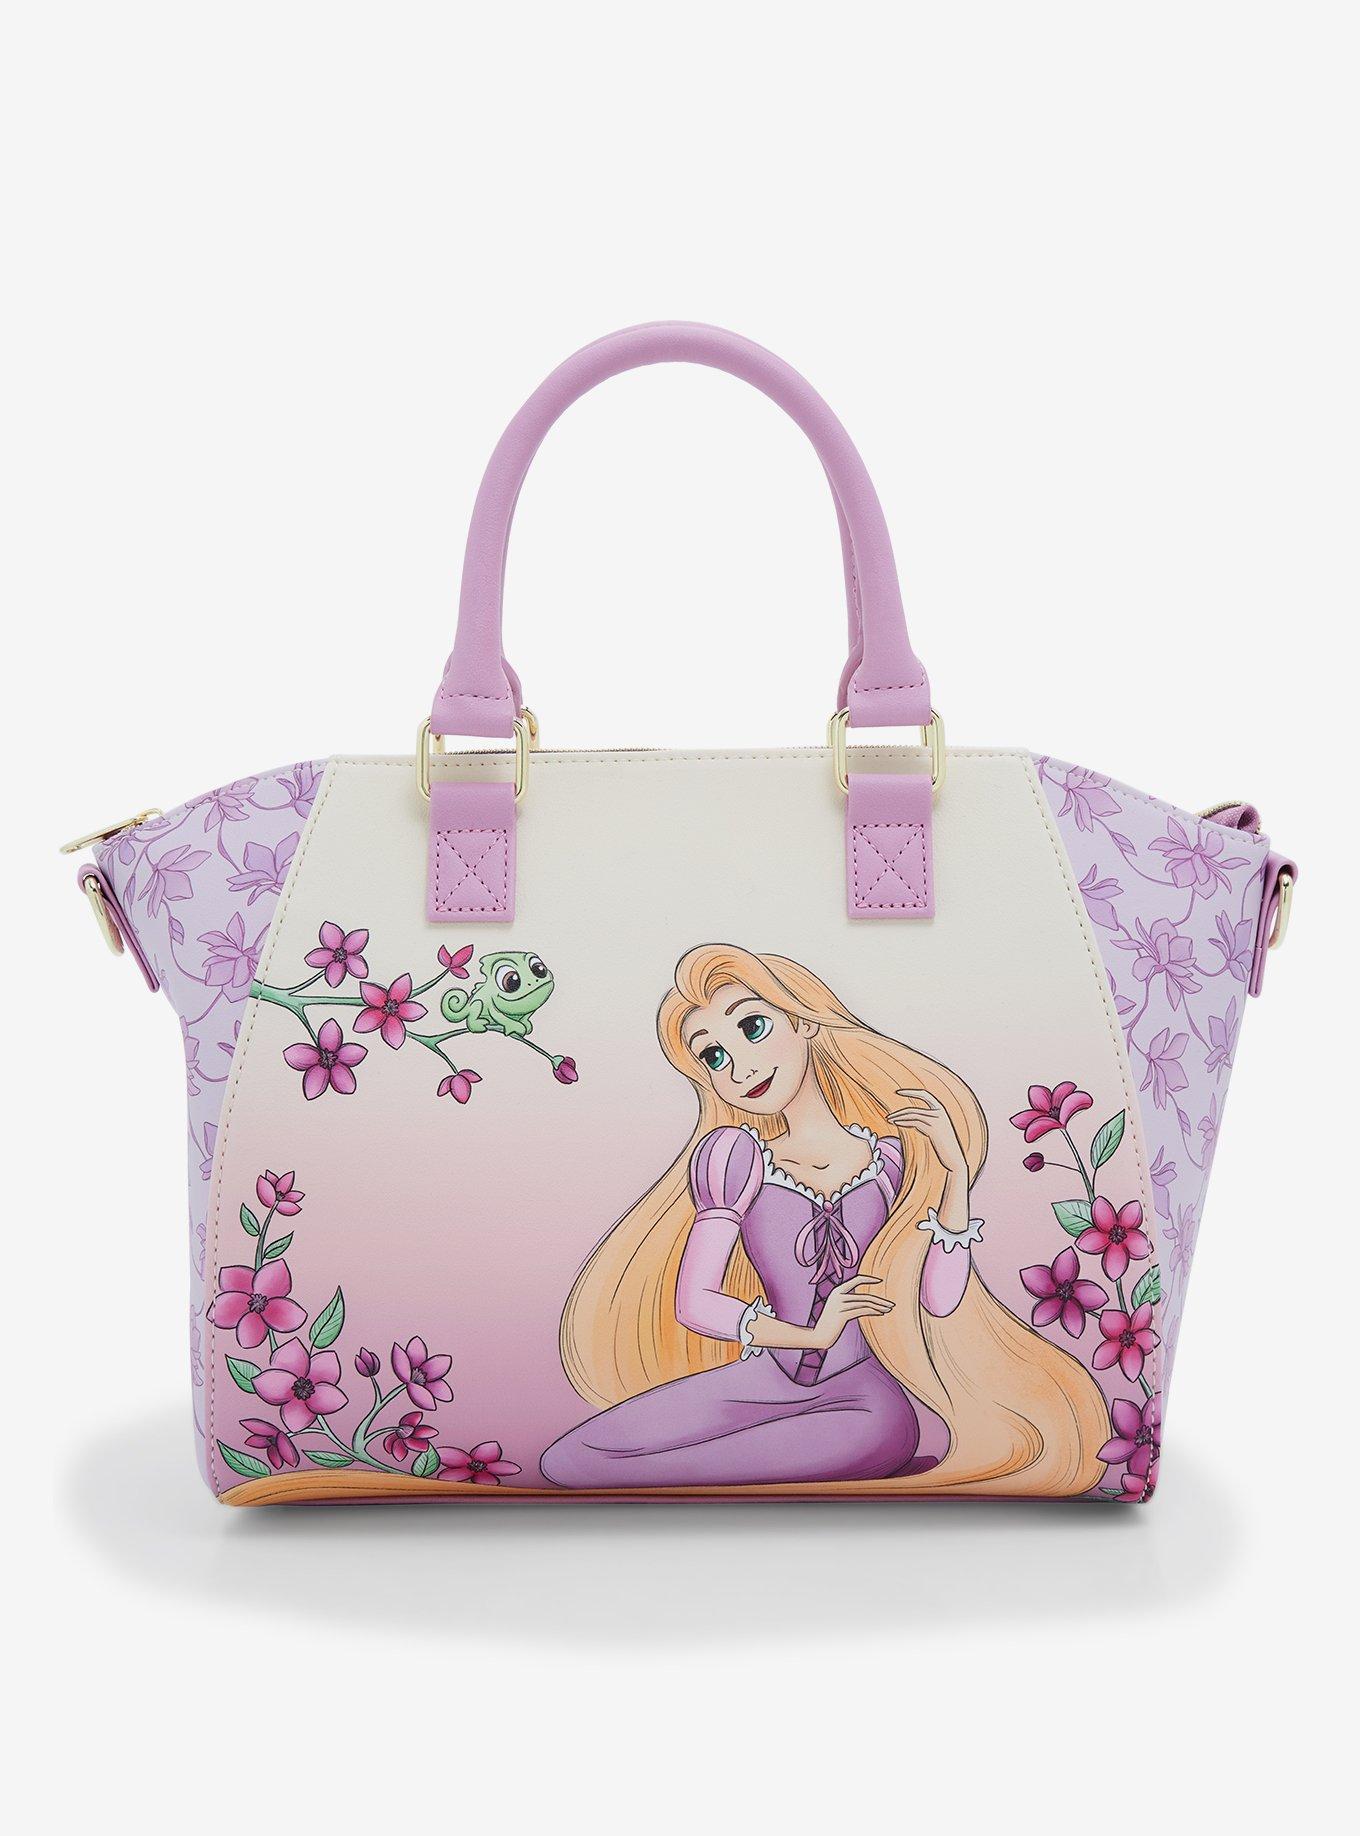 Coming Soon: Exclusive Loungefly Disney Tangled Rapunzel Stars Mini Backpack  💎 Only available at @hottopic